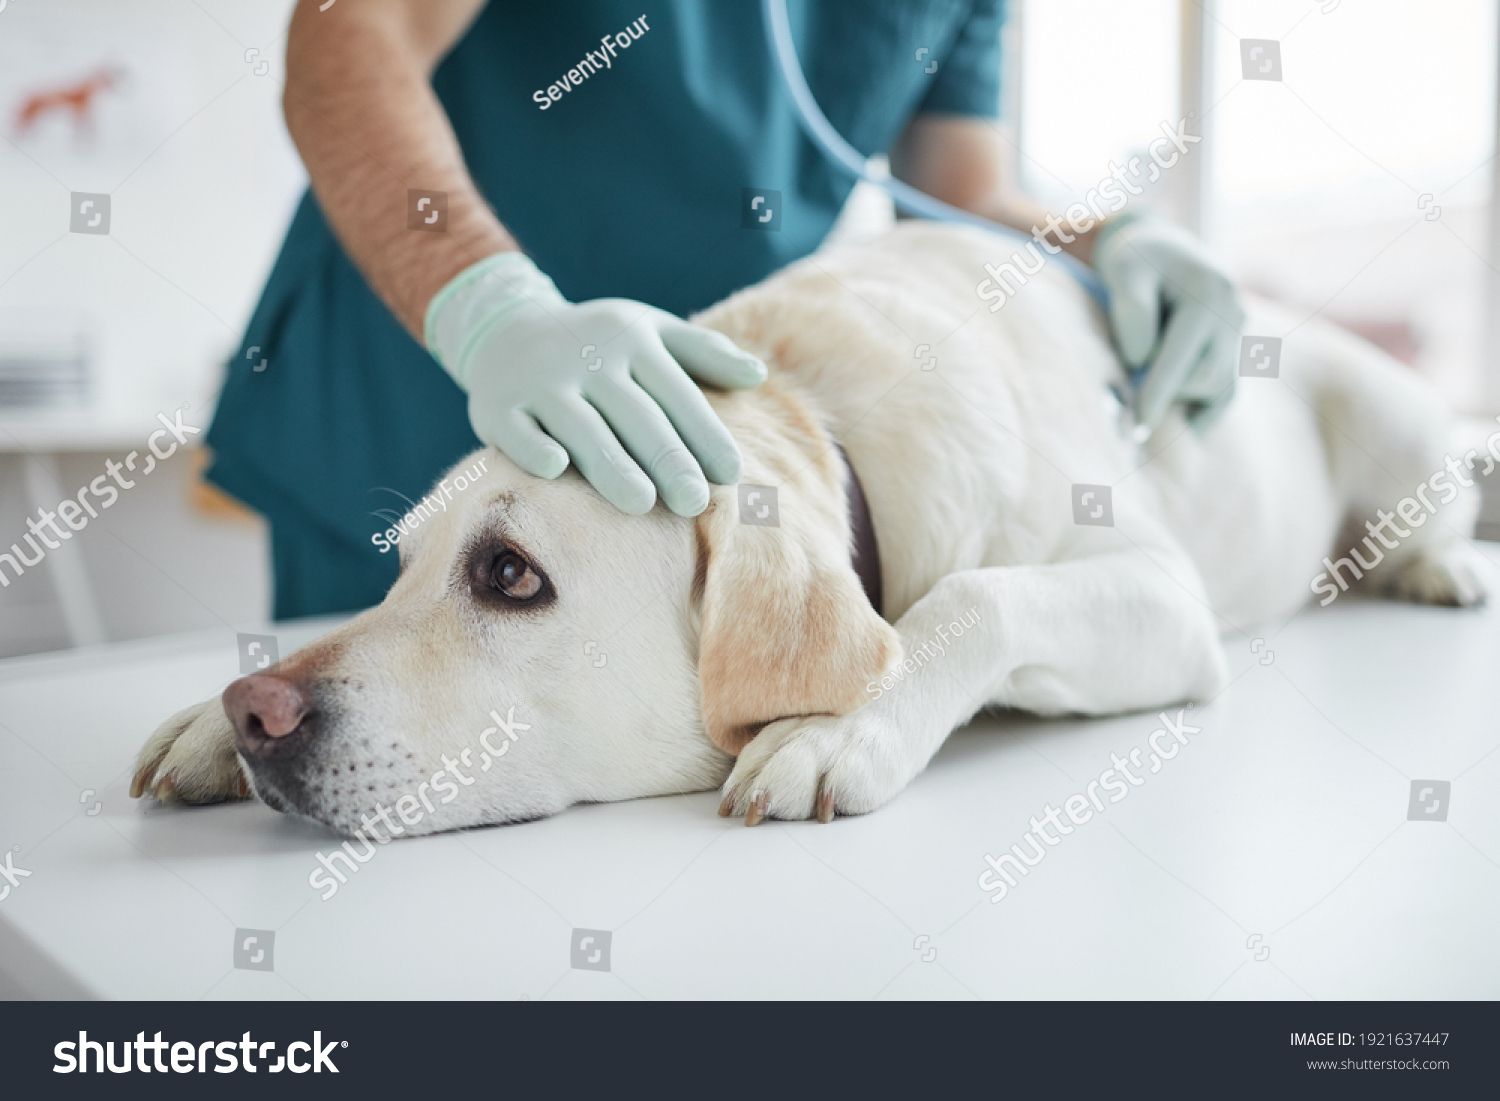 Portrait of big white dog lying on examination table in clinic with unrecognizable veterinarian listening to heartbeat via stethoscope, copy space #1921637447